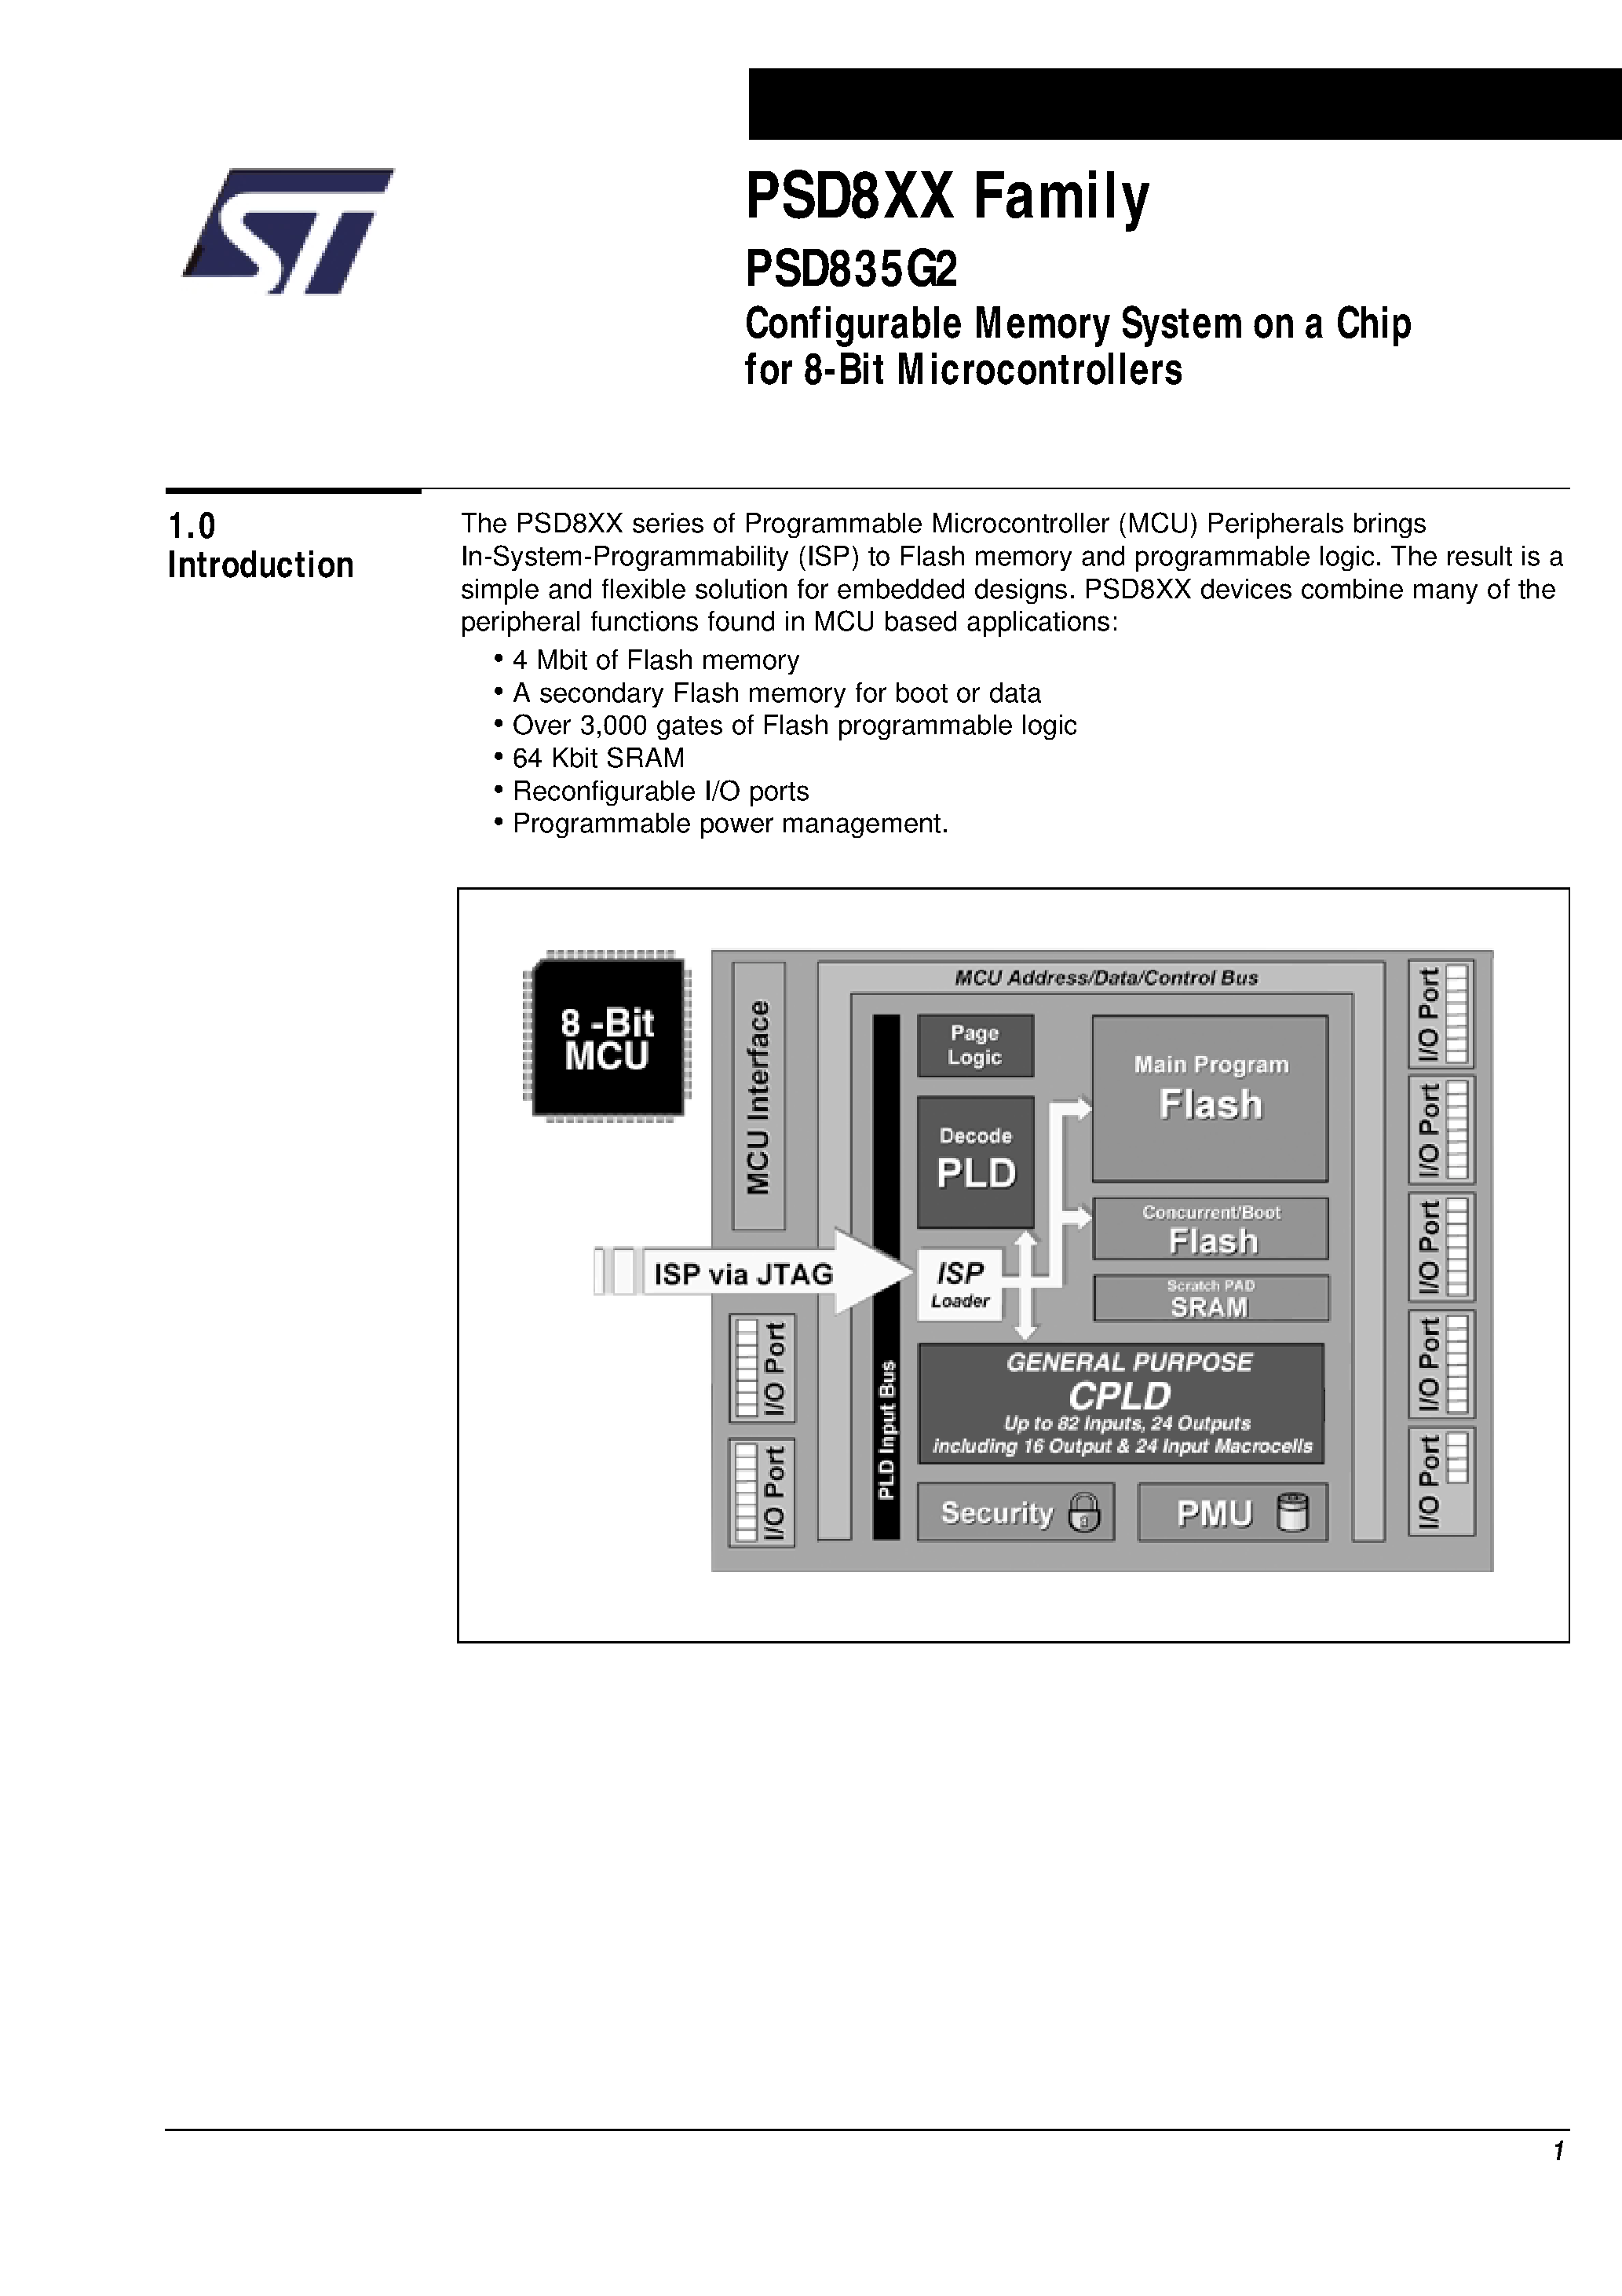 Datasheet PSD835F2-A-12B81I - Configurable Memory System on a Chip for 8-Bit Microcontrollers page 2